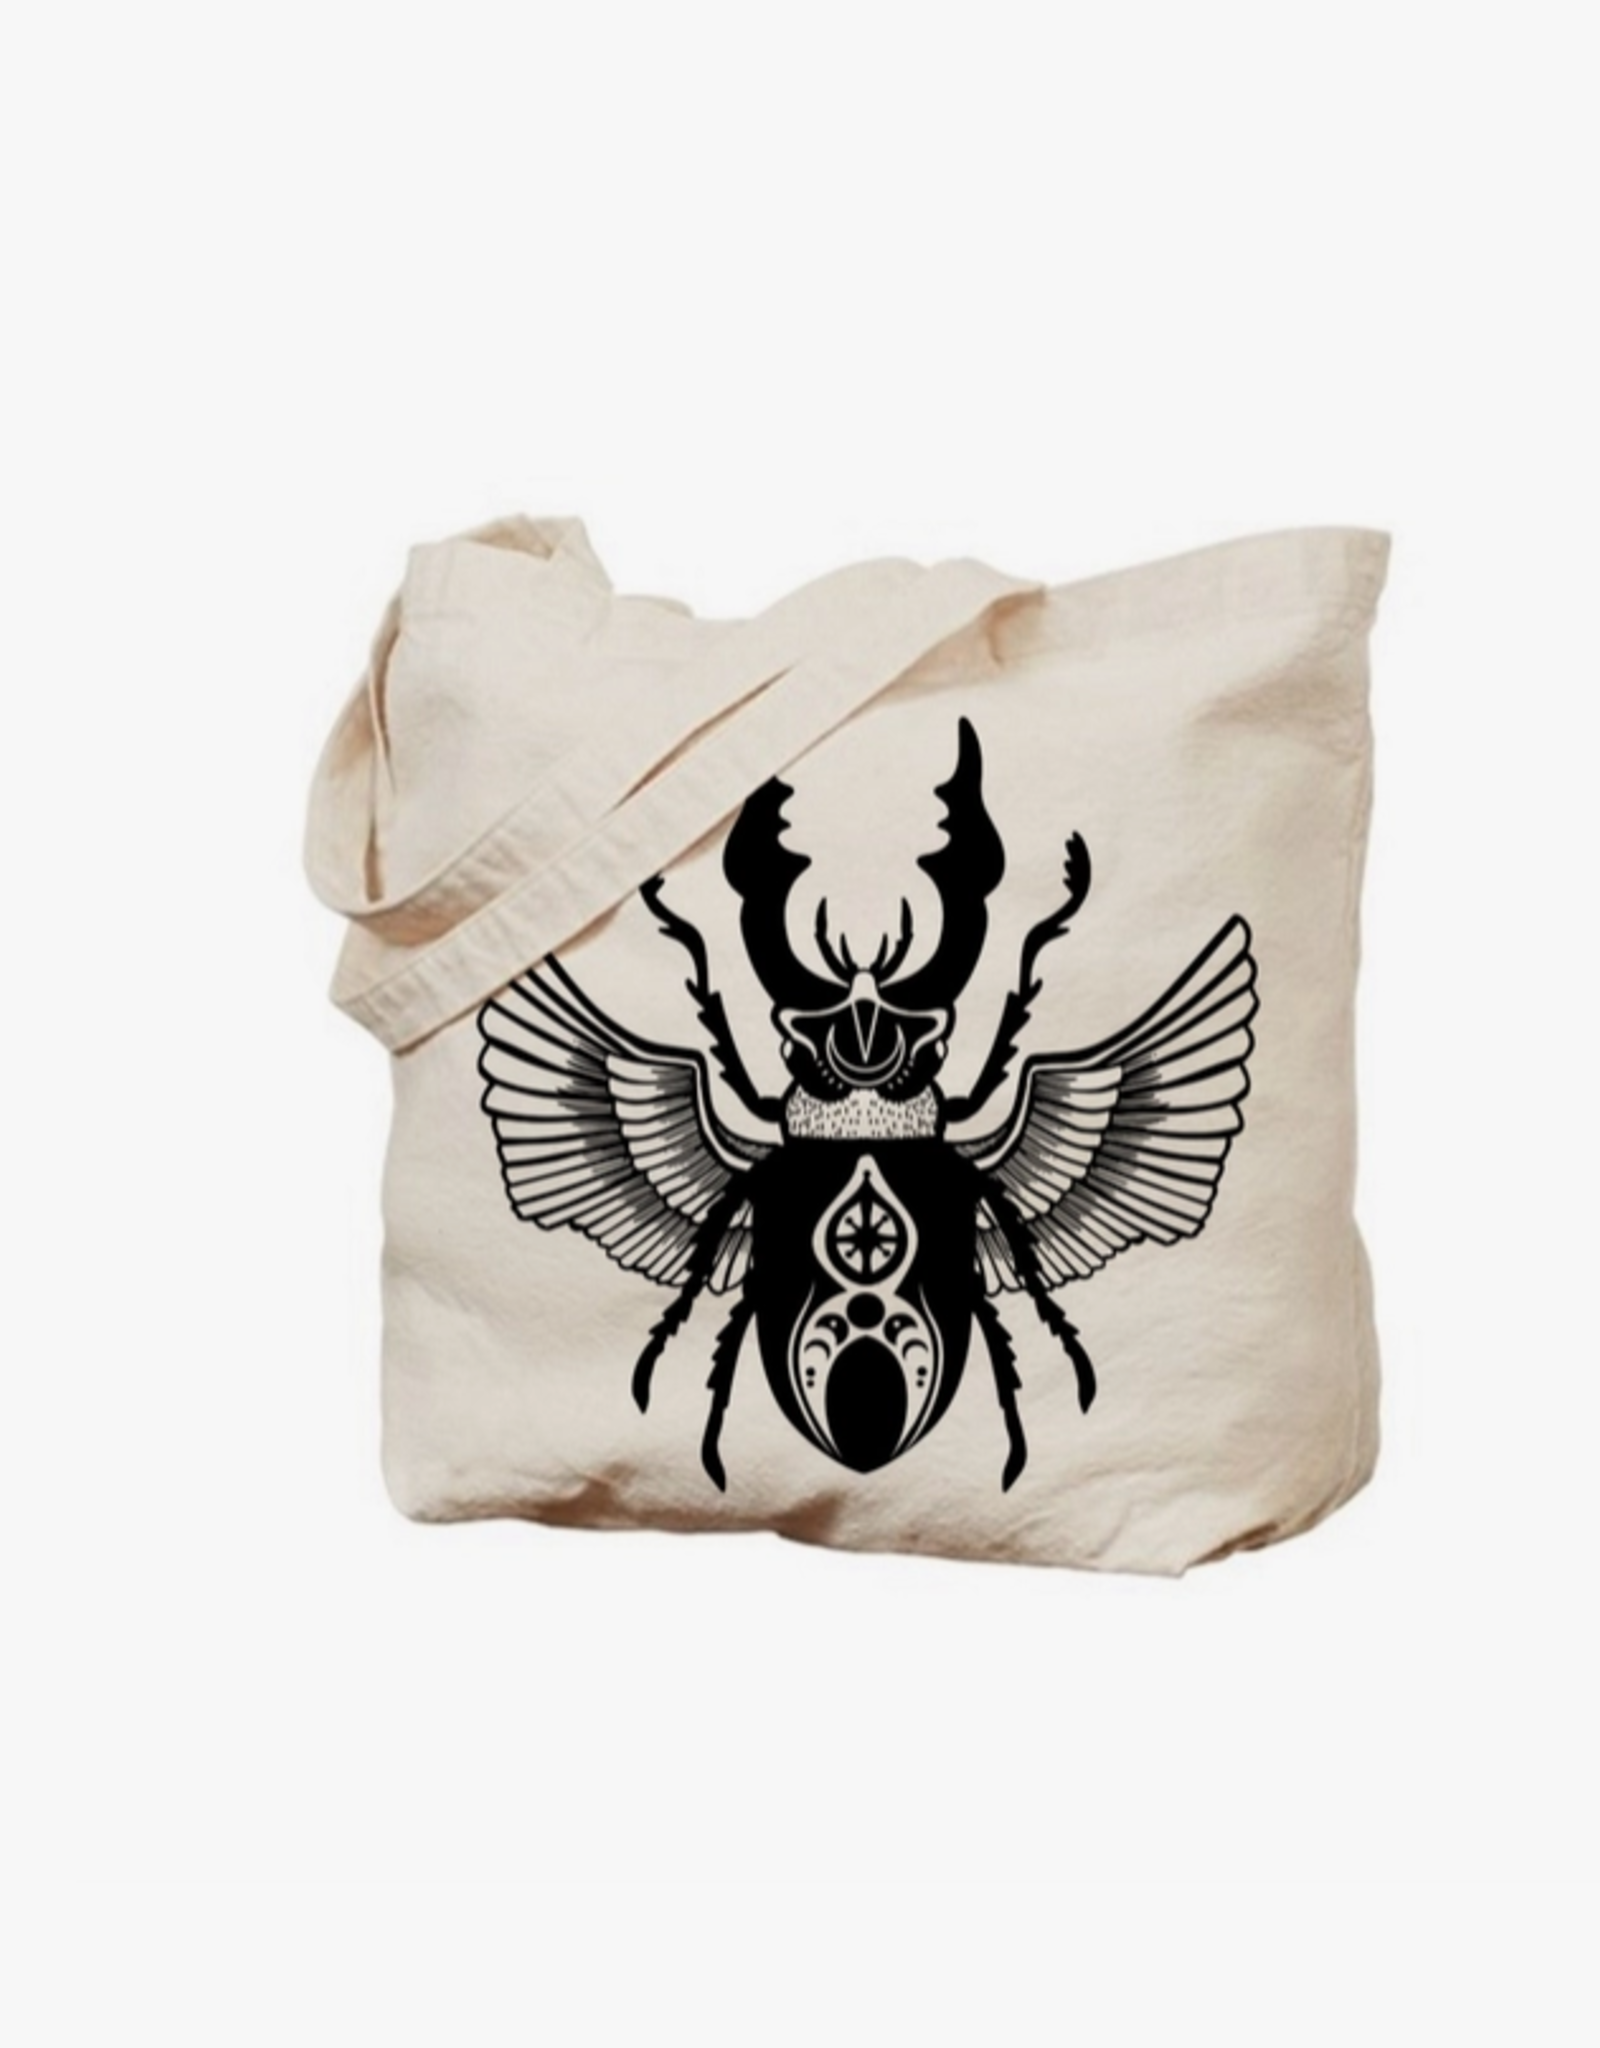 Moon phase Scarab Beetle Occult Insect Tote Bag